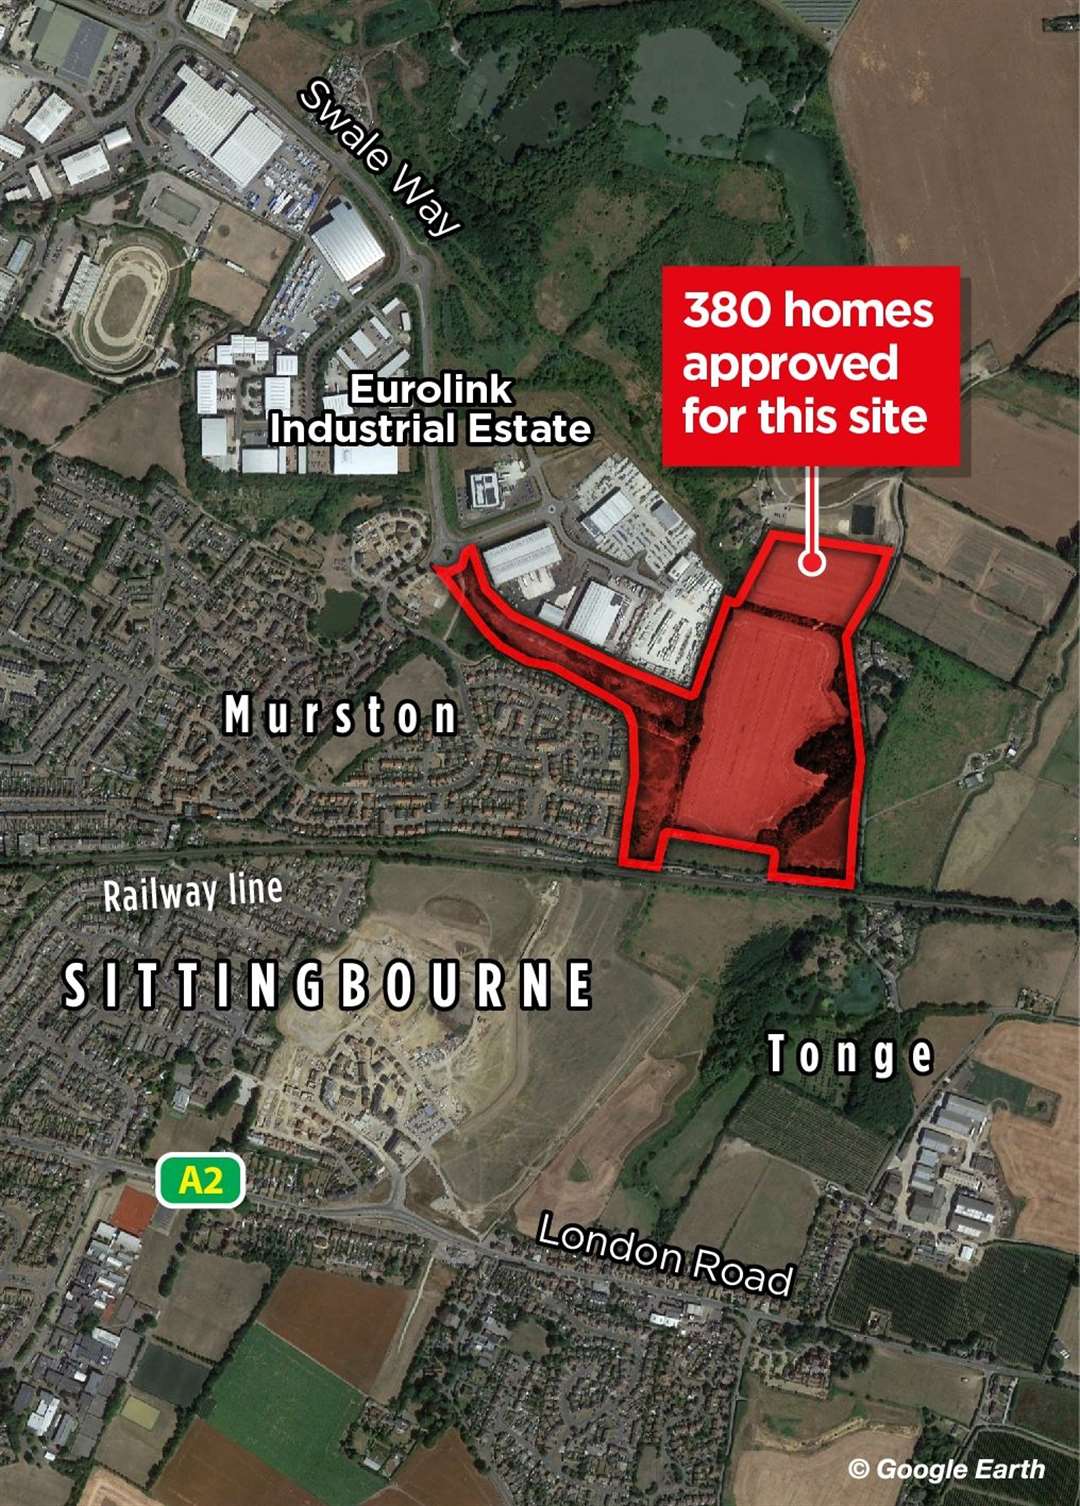 Where the new 380 home development is planned to be built in Sittingbourne